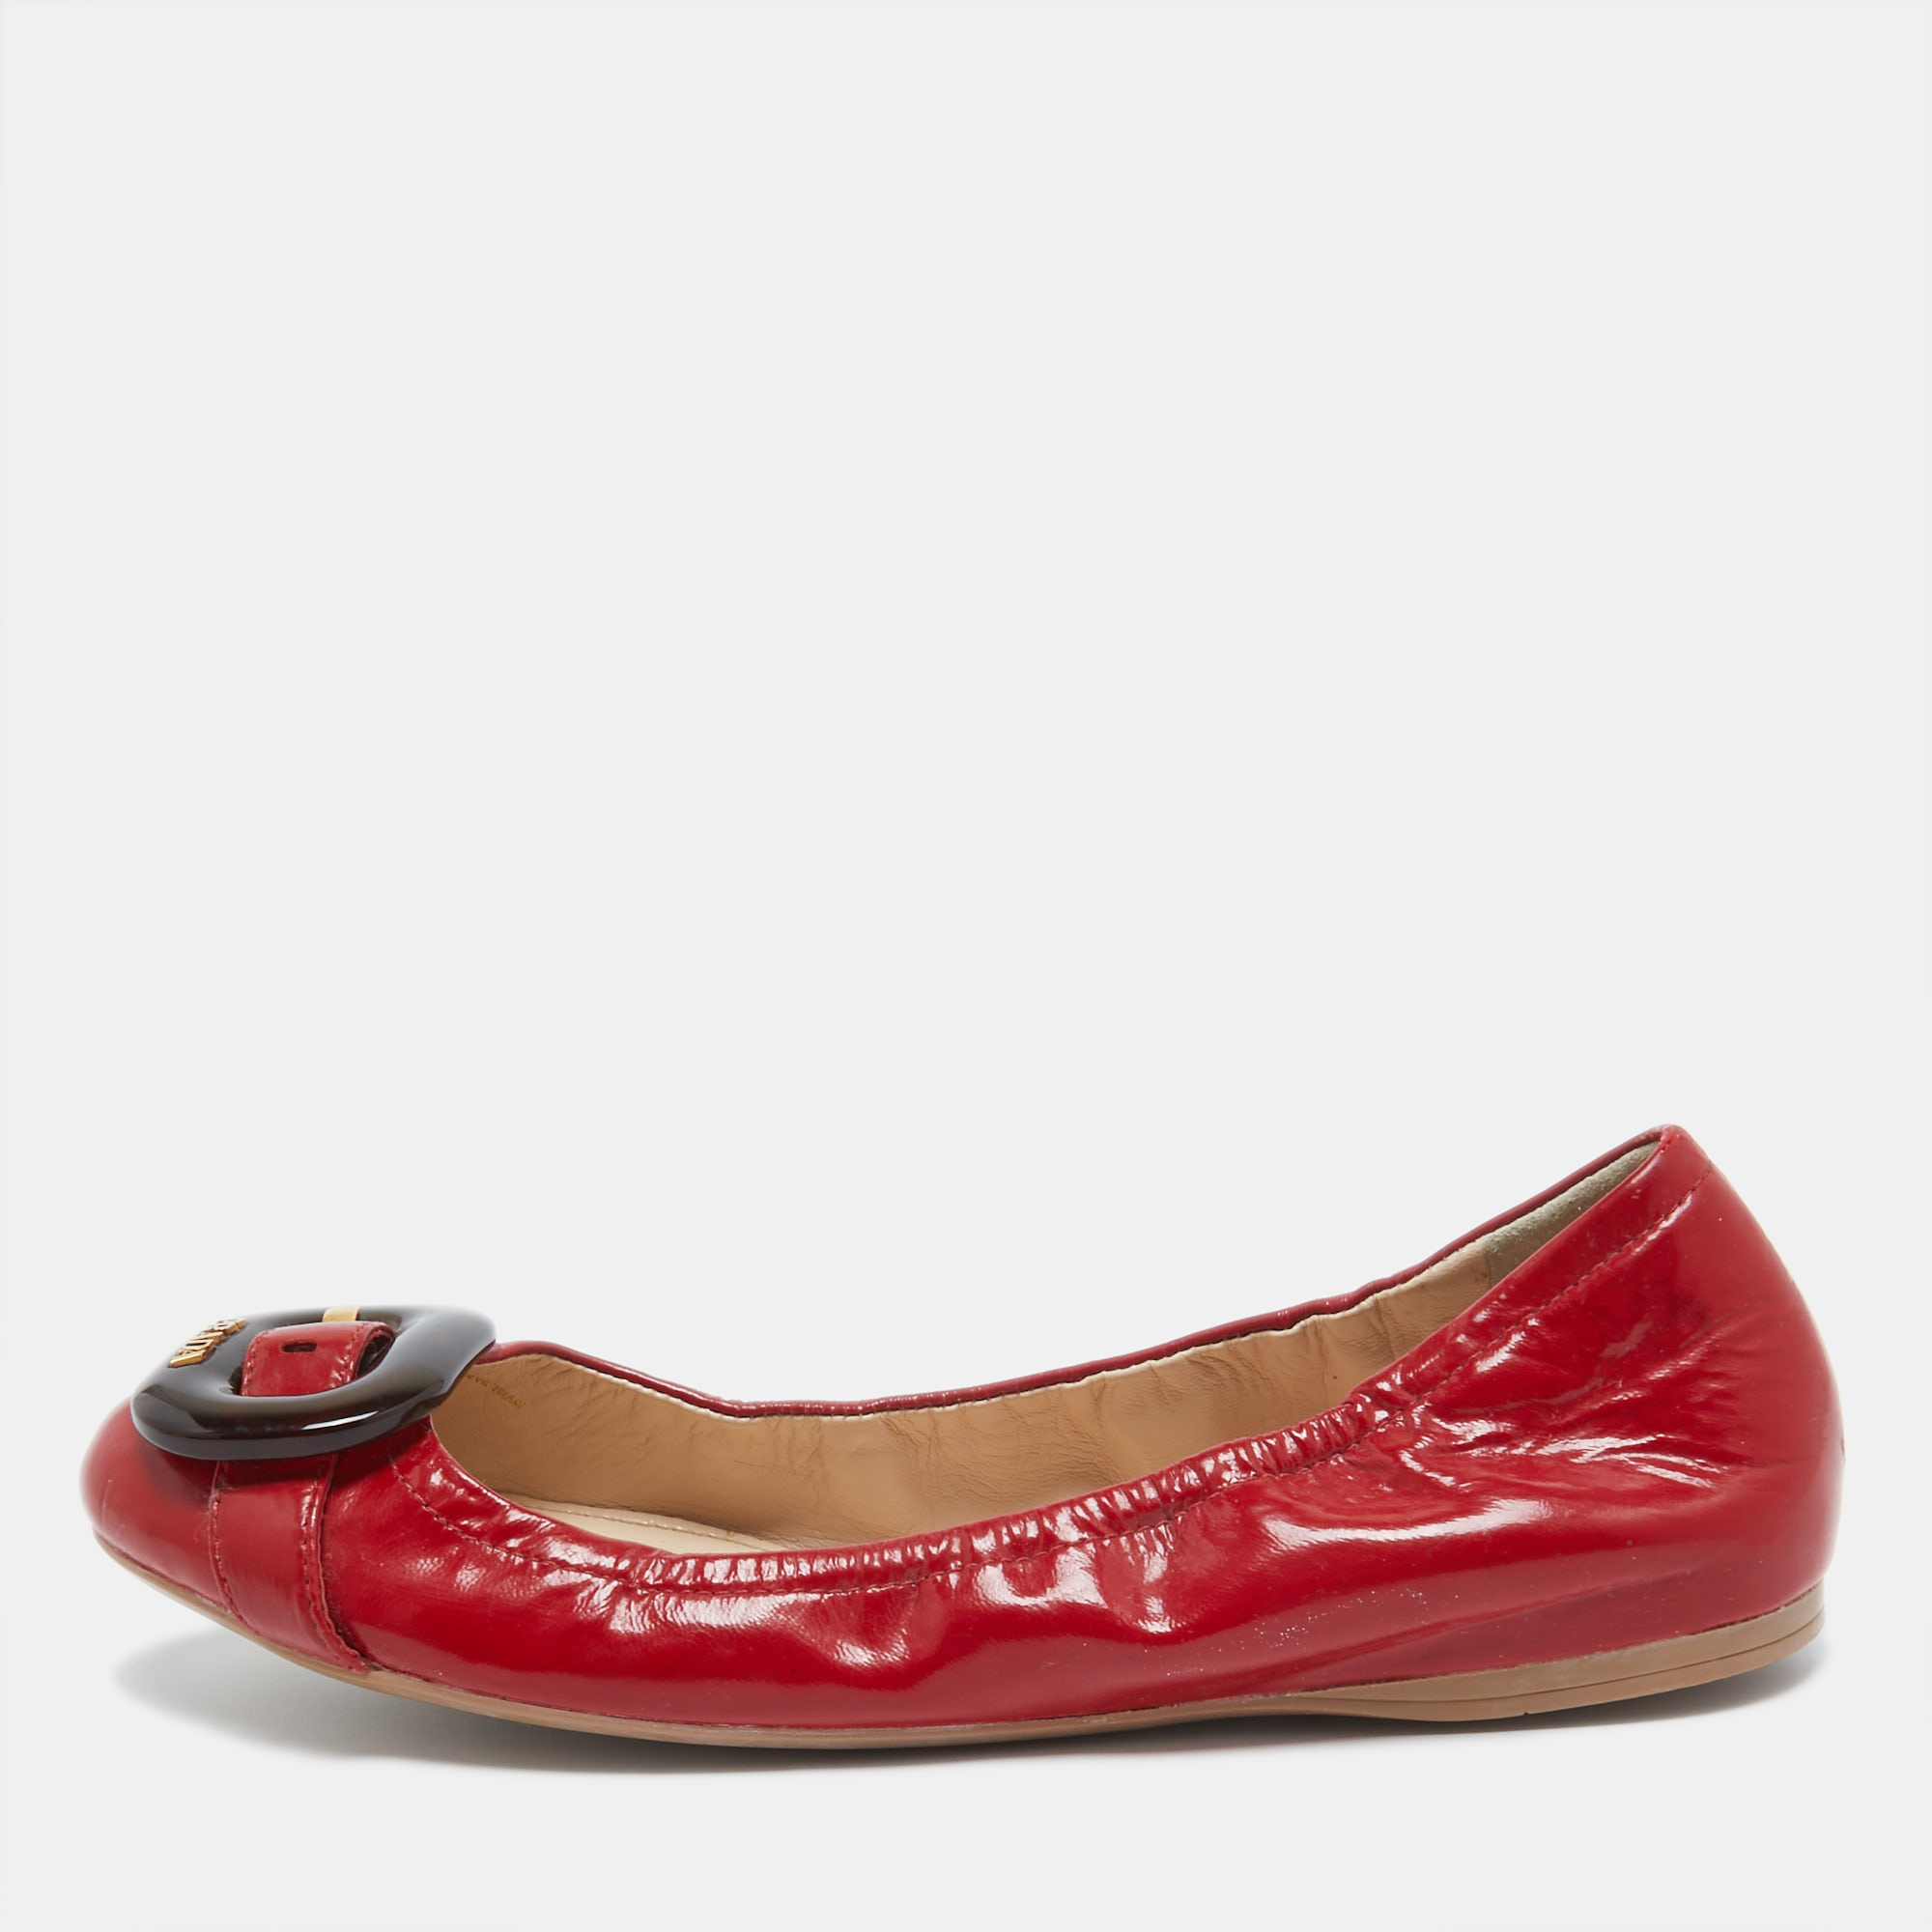 Pre-owned Prada Red Patent Leather Buckle Ballet Flats Size 39